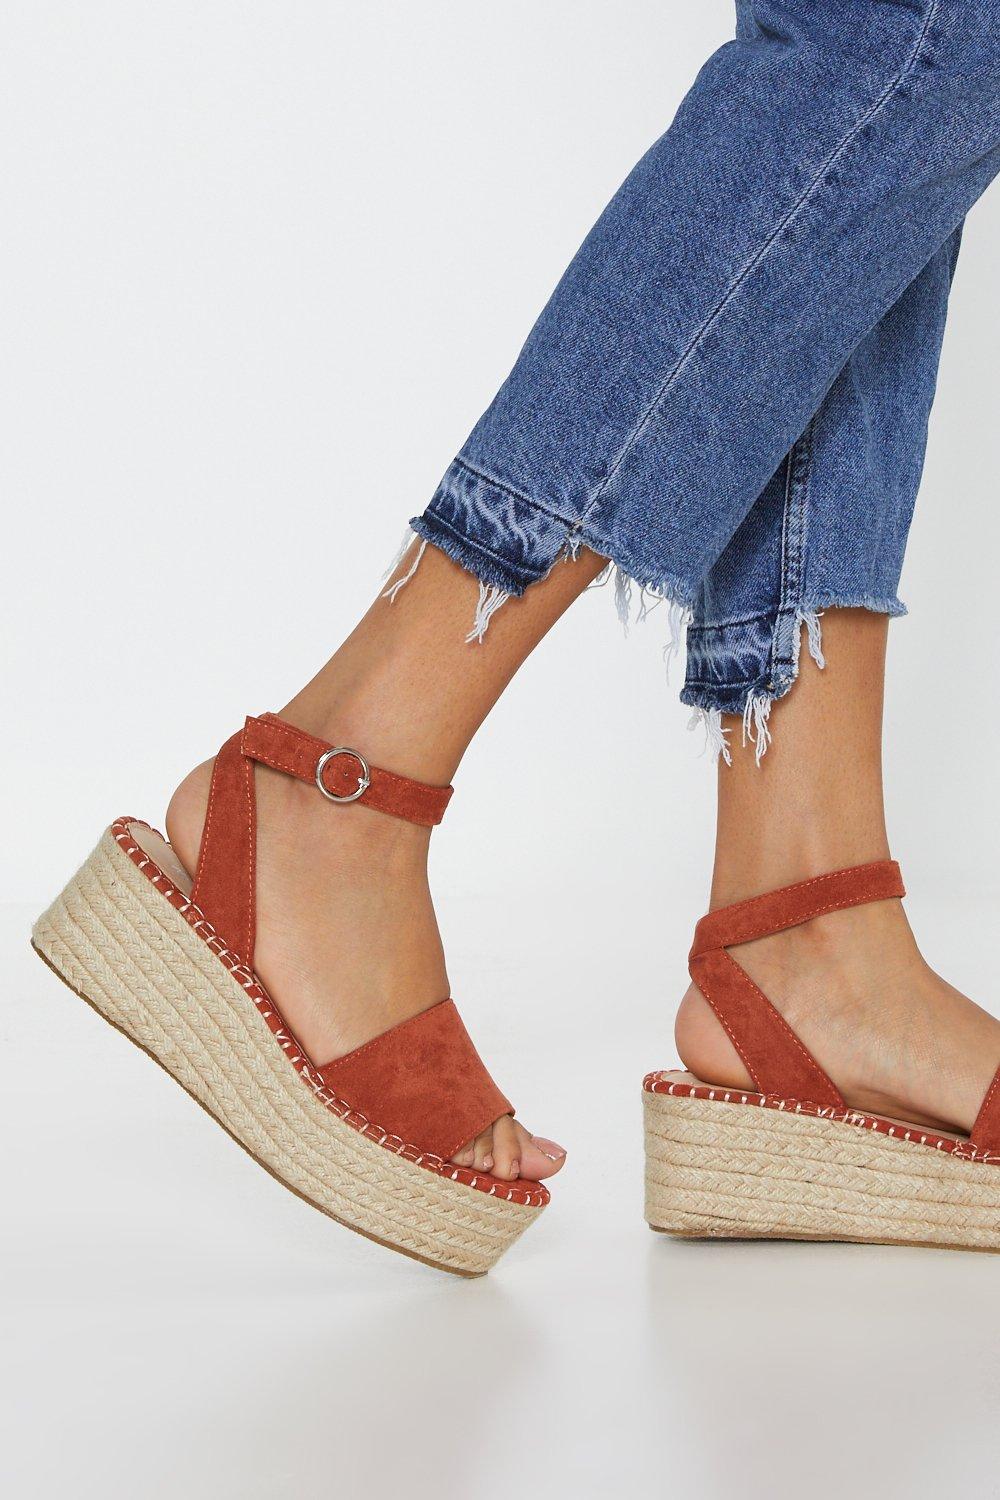 Stakes Woven Platform Sandals | Nasty Gal